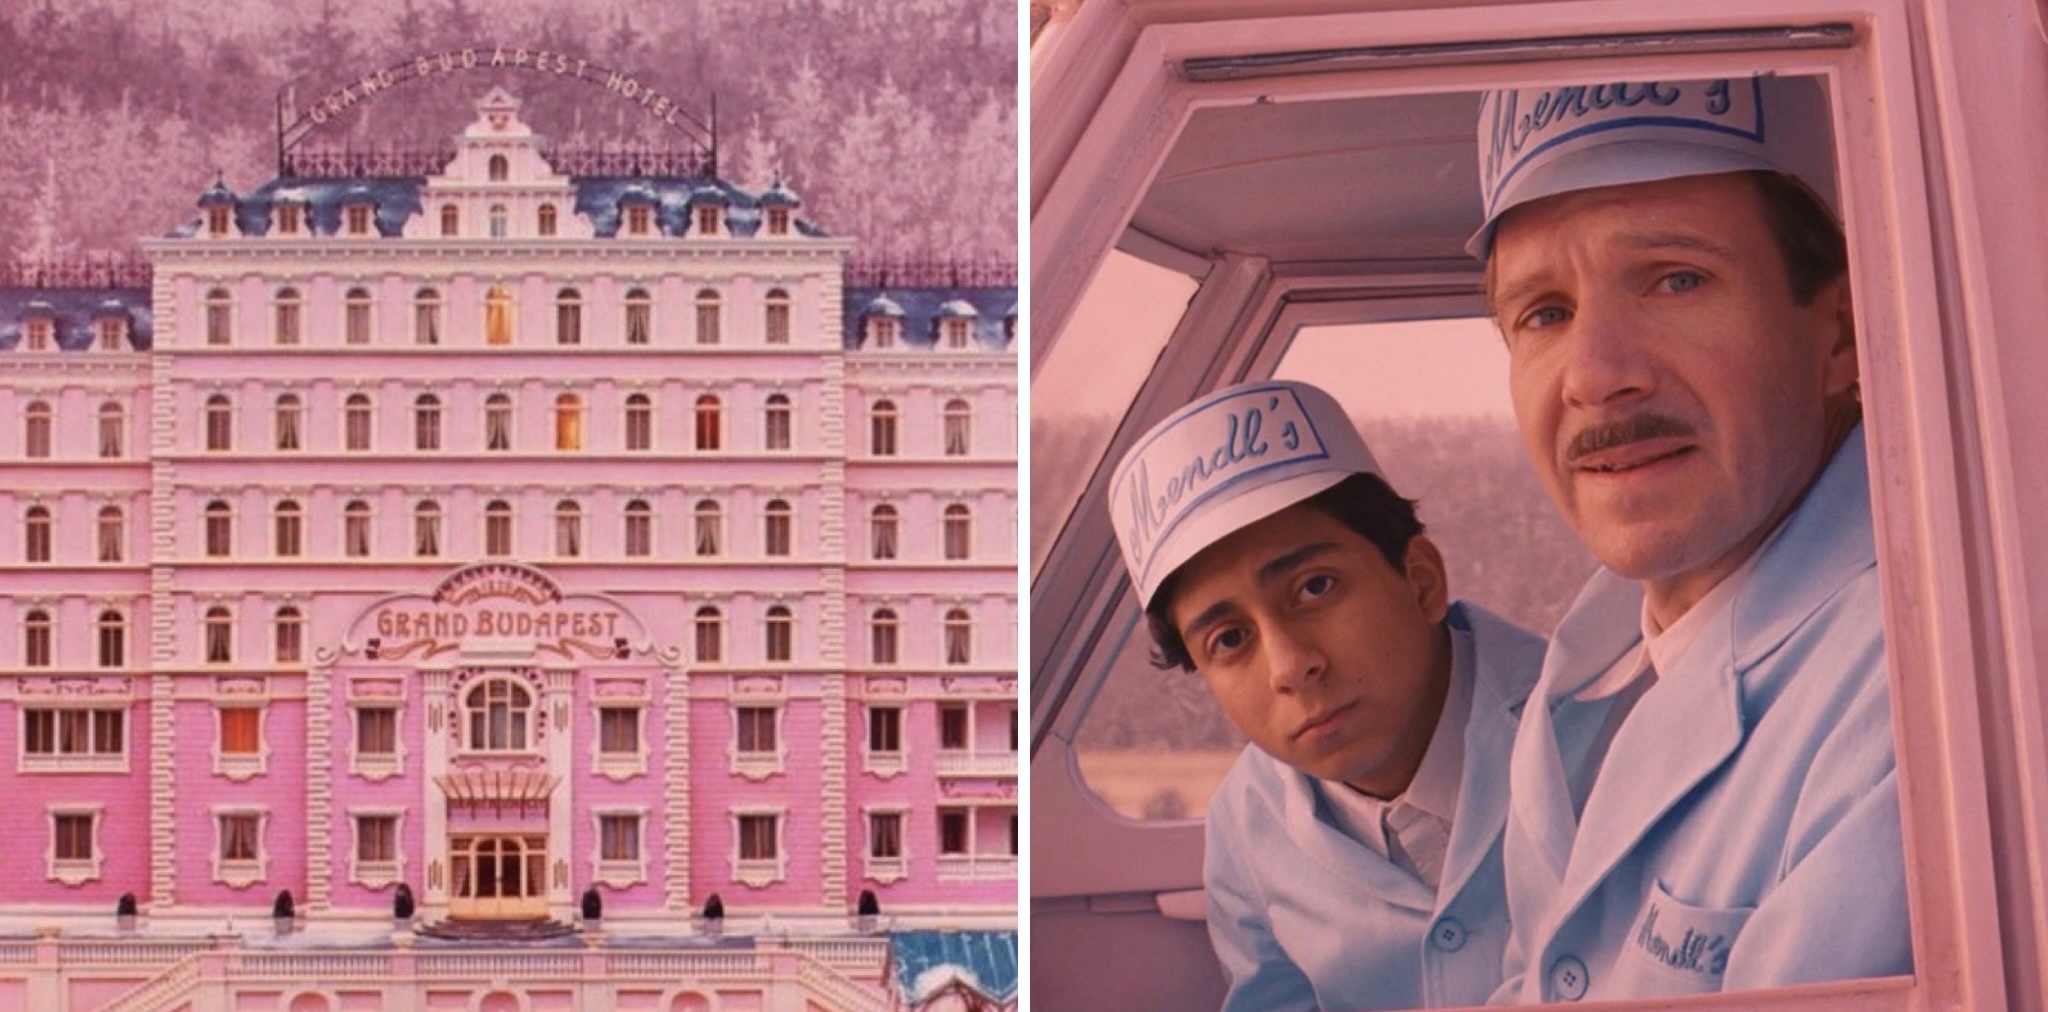 The Grand Budapest Hotel is coming back to the big screen in Montreal on Sept. 23